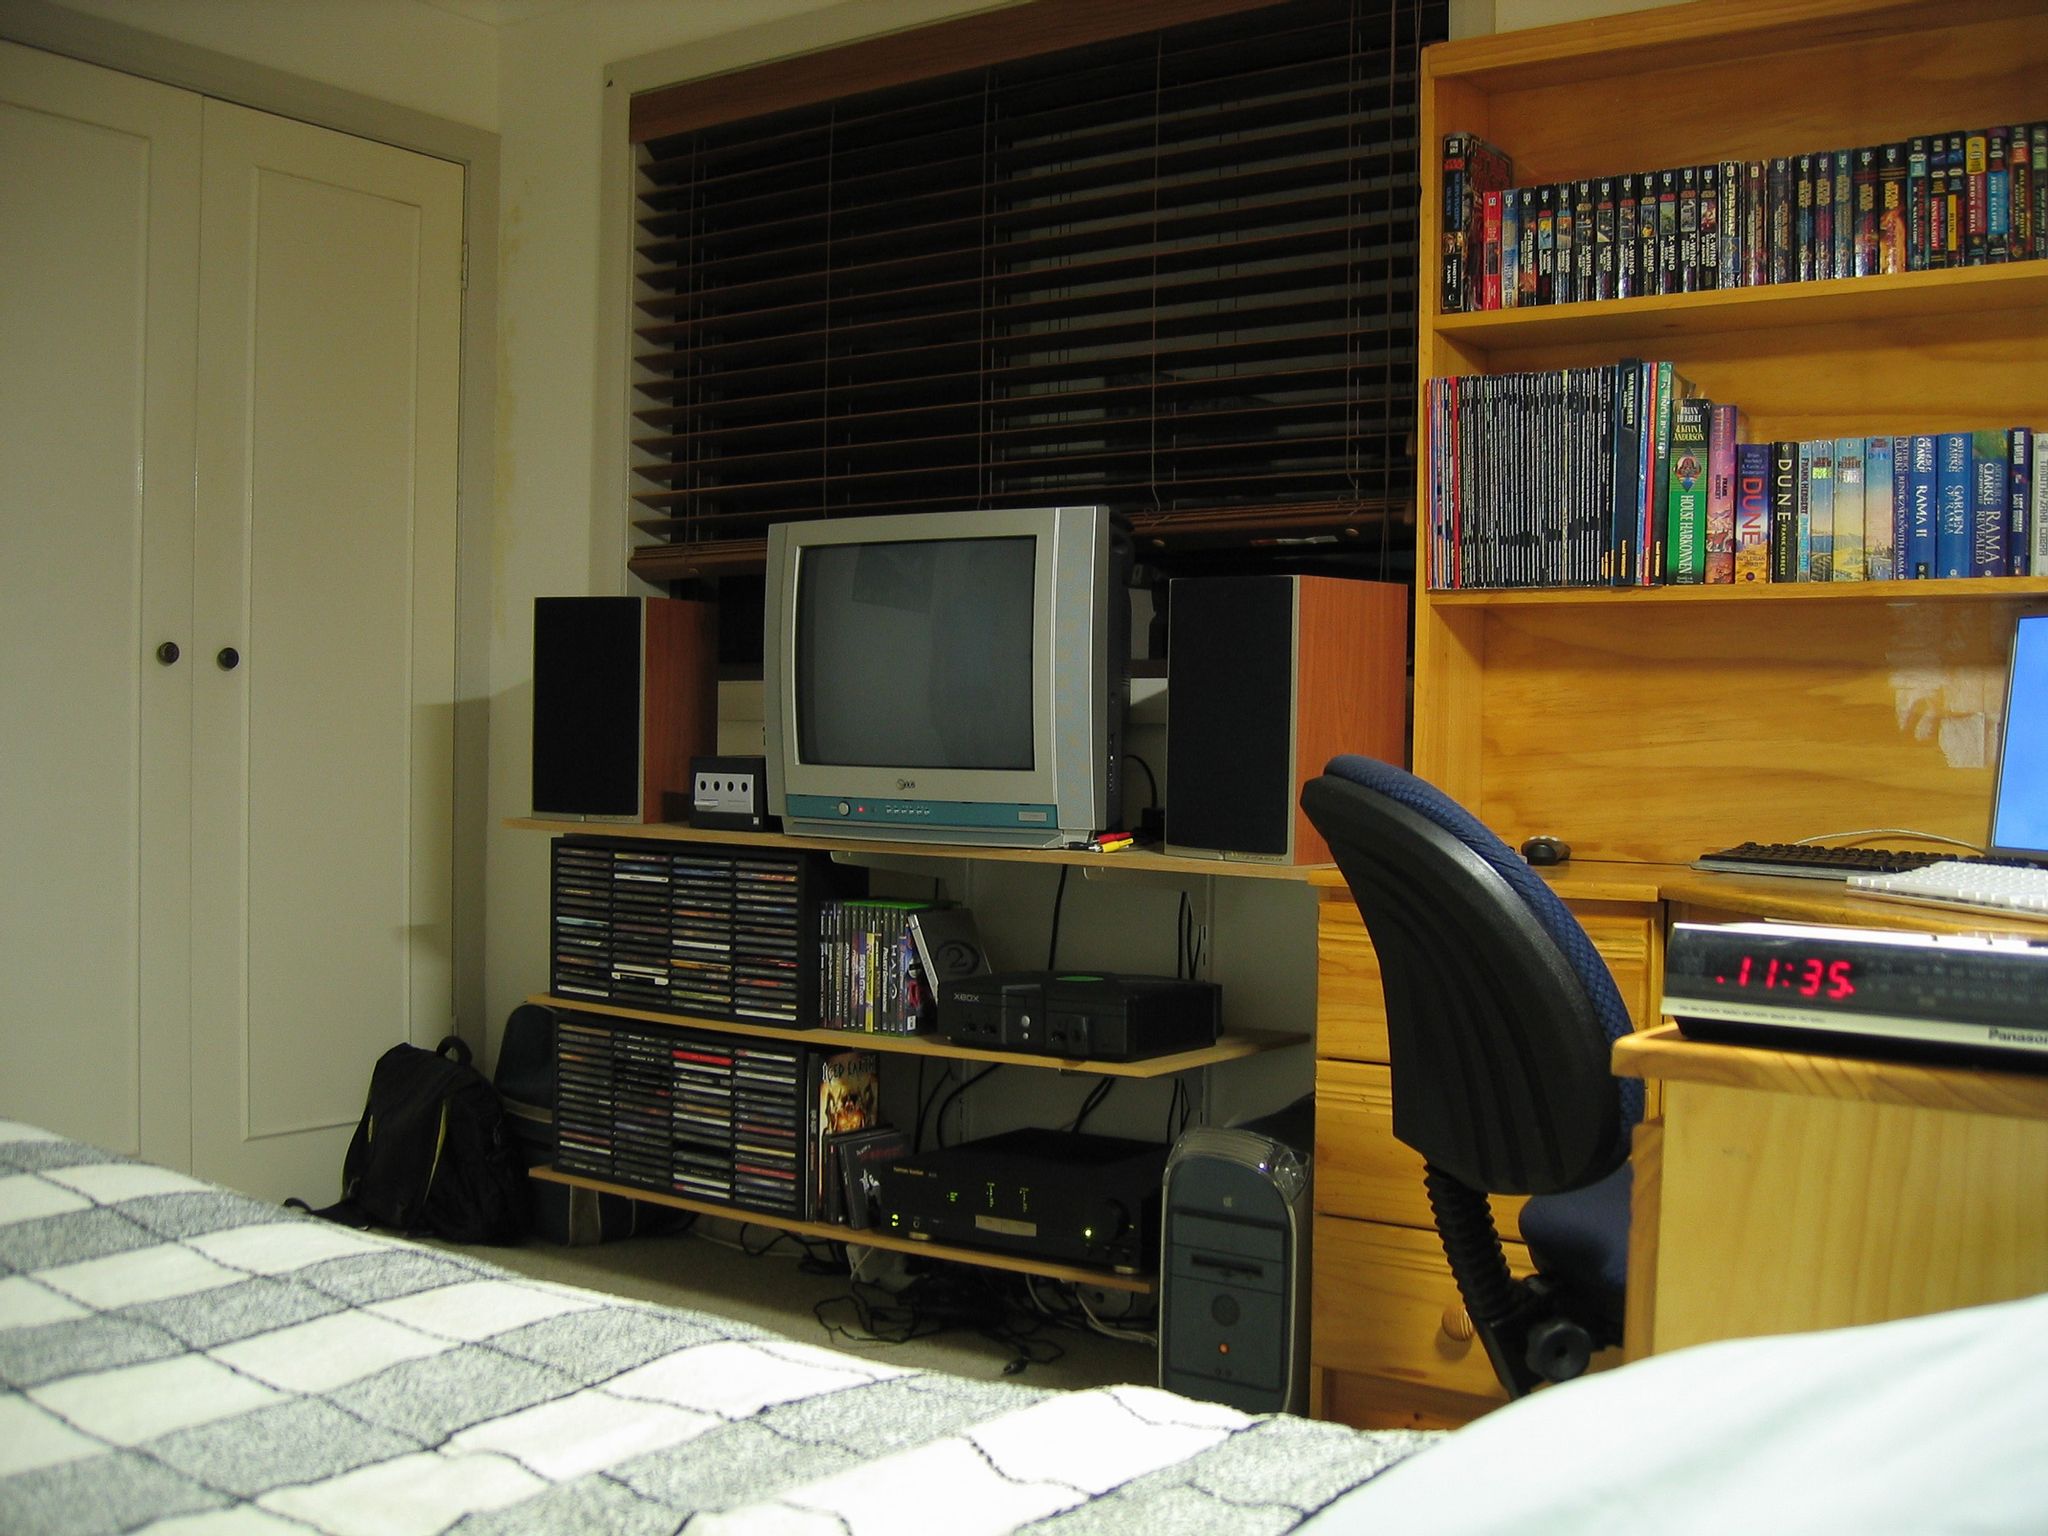 A photo taken with the camera sitting on a bed, looking towards the opposite wall of the room. There's a window with brown wooden venetian blinds, in front of the window are three shelves mounted to the wall. On the top shelf is a CRT TV, two bookshelf speakers, and a Nintendo GameCube. On the second shelf is a CD rack full of CDs, the jewel cases of a selection of Xbox and GameCube games, and an original Xbox. On the bottom shelf are more CDs, and a stereo amplifier. Next to the shelves are a graphite Power Mac G4, and next to that is a corner desk with tall bookshelves on top of the desk, fulled with books.